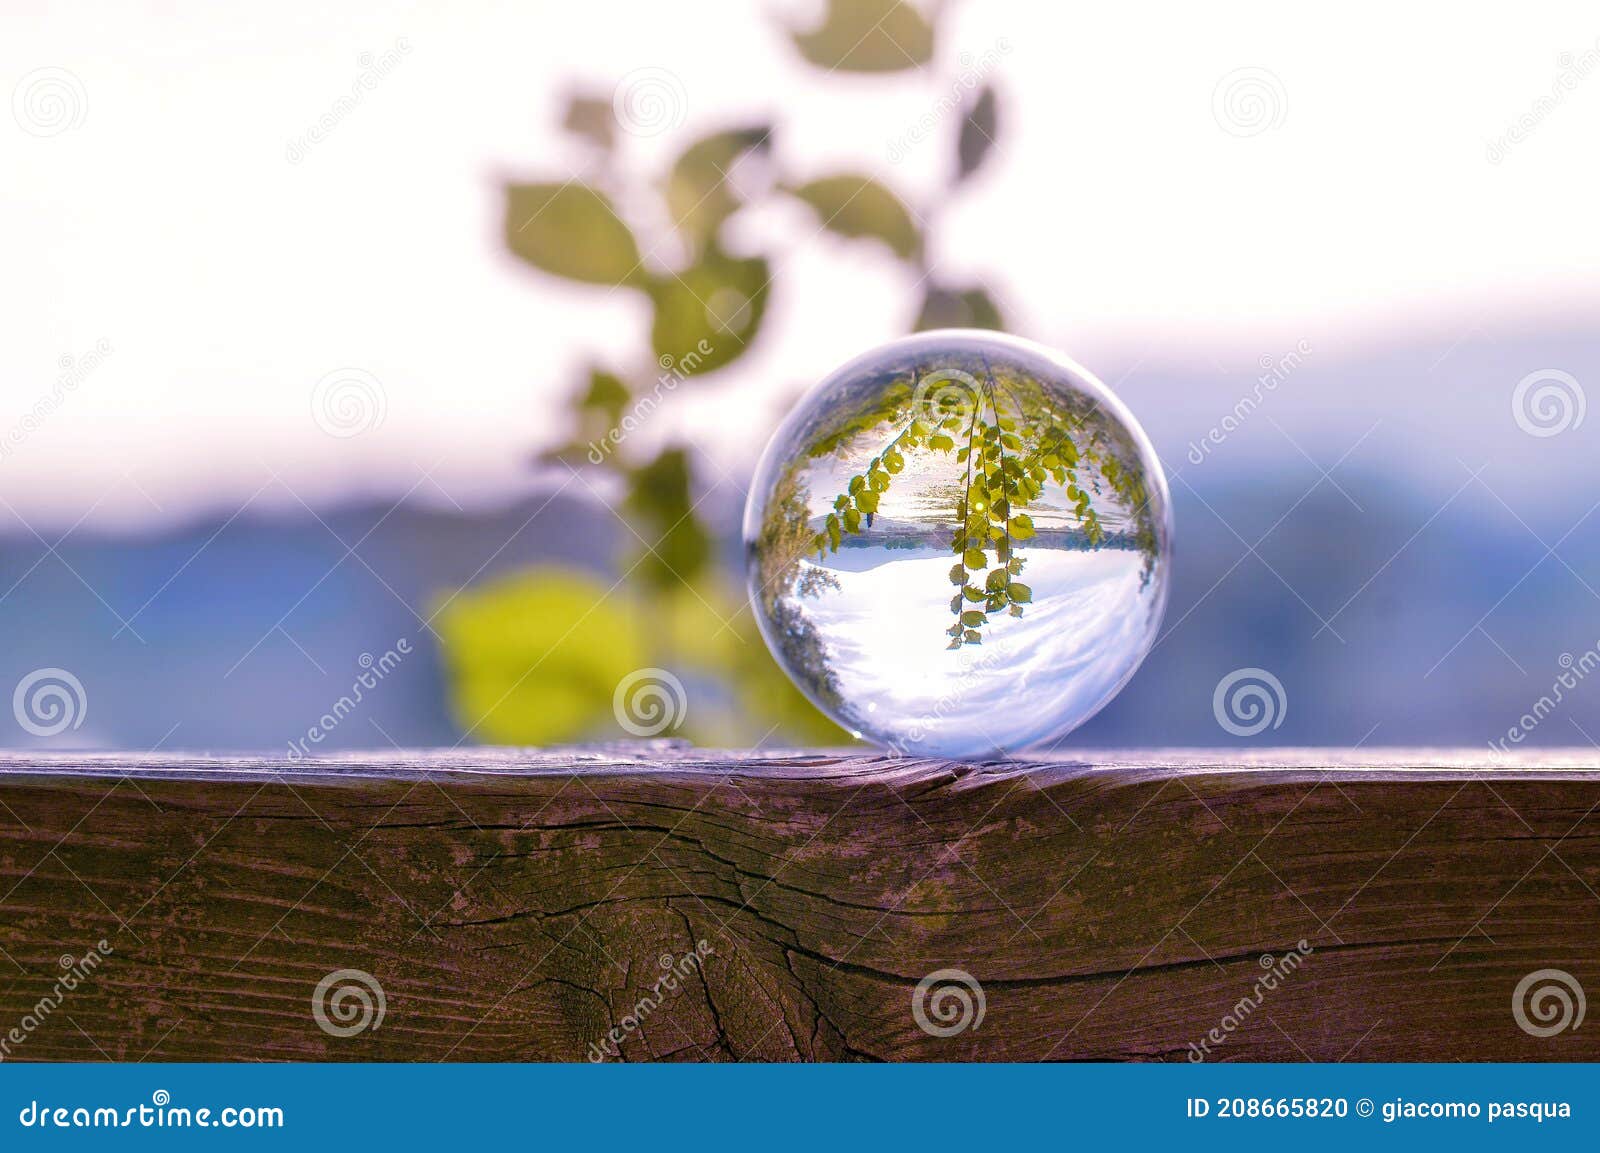 lens ball in nature